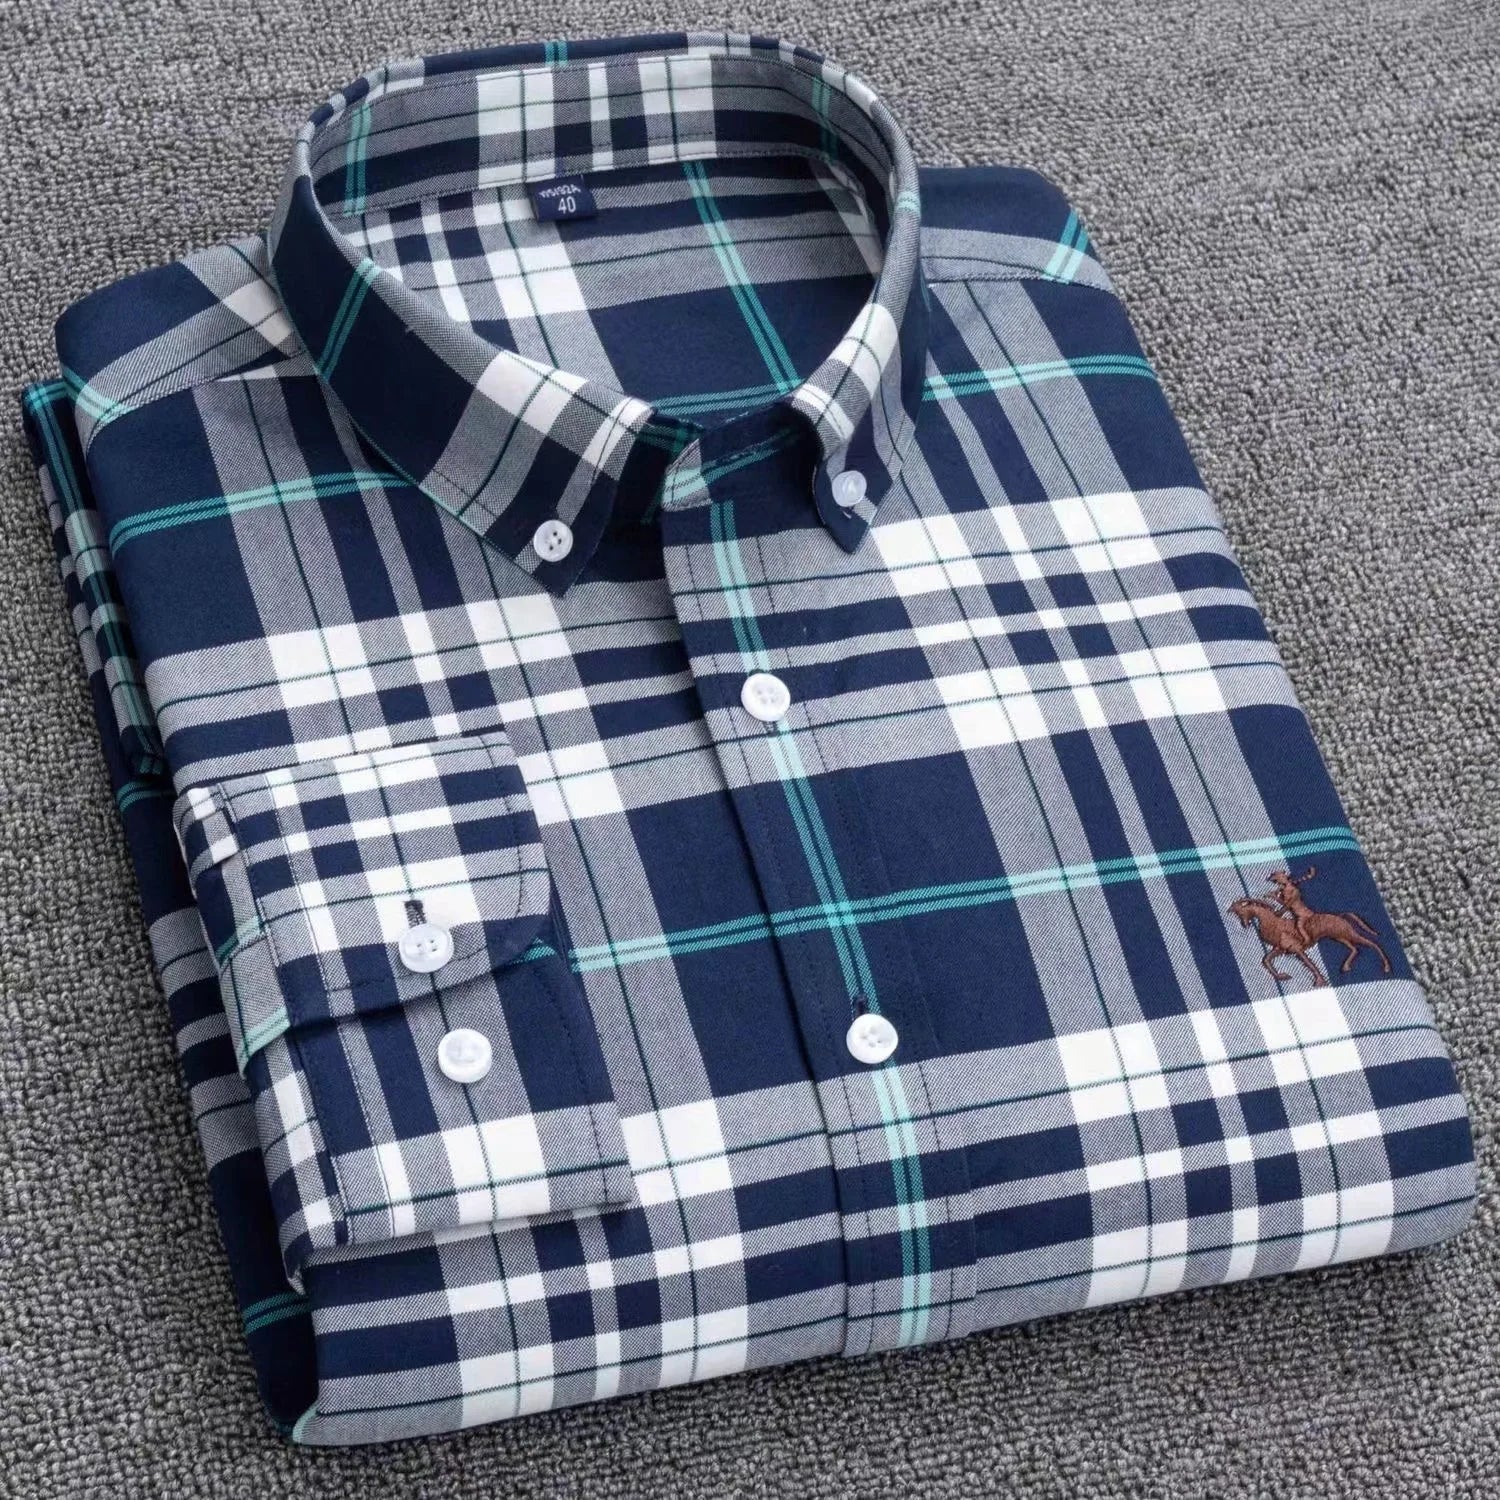 High Quality Oxford Man 100 percent Cotton Leisure Embroidered Horse Shirts